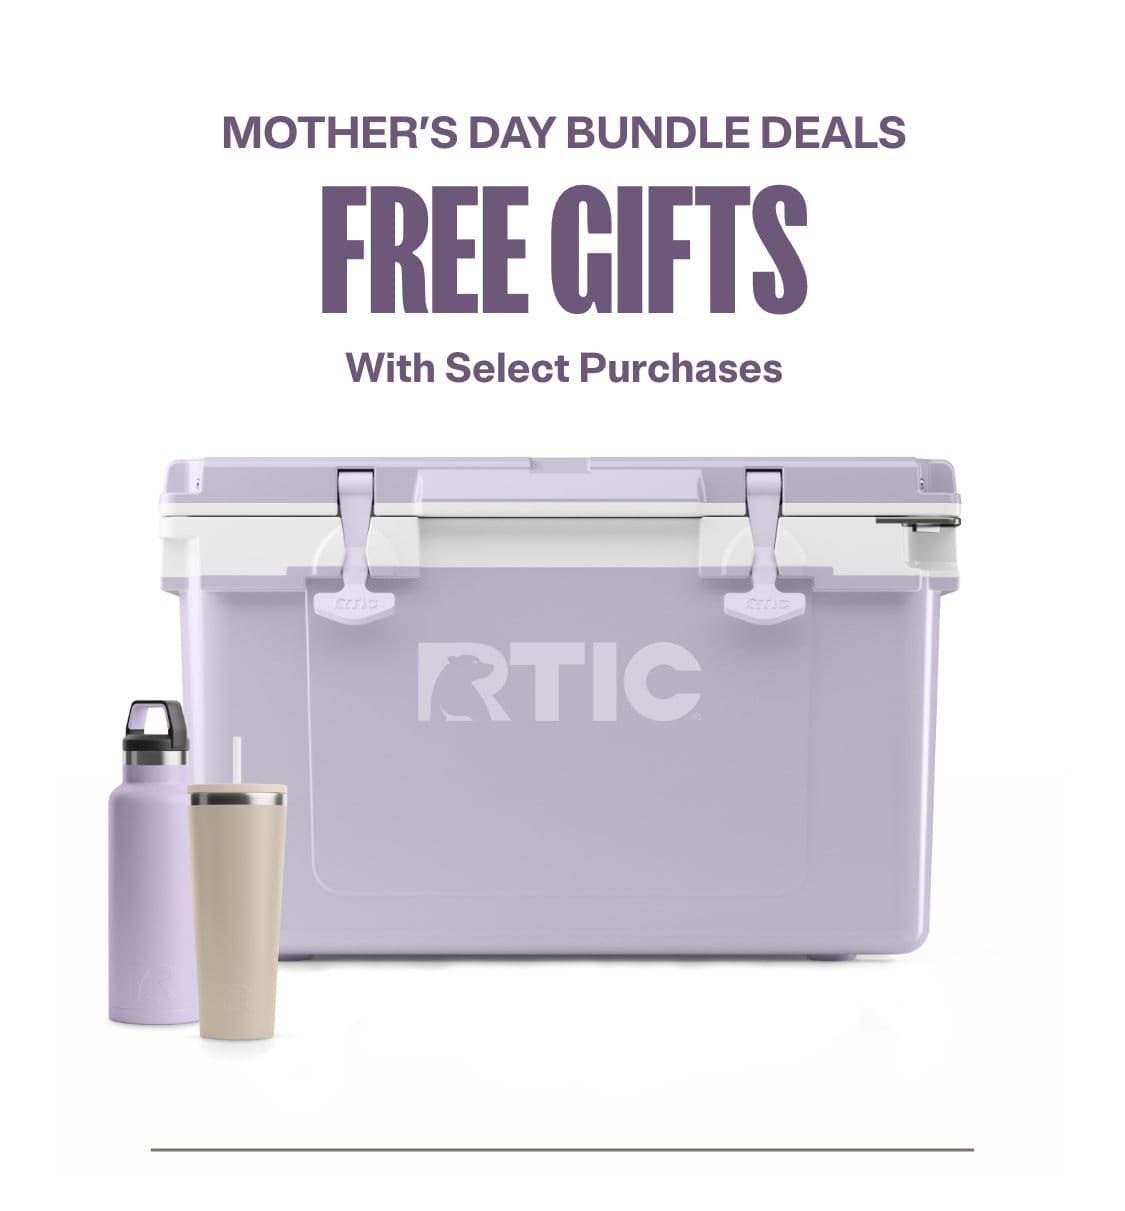 MOTHER'S DAY BUNDLE DELAS | FREE GIFTS